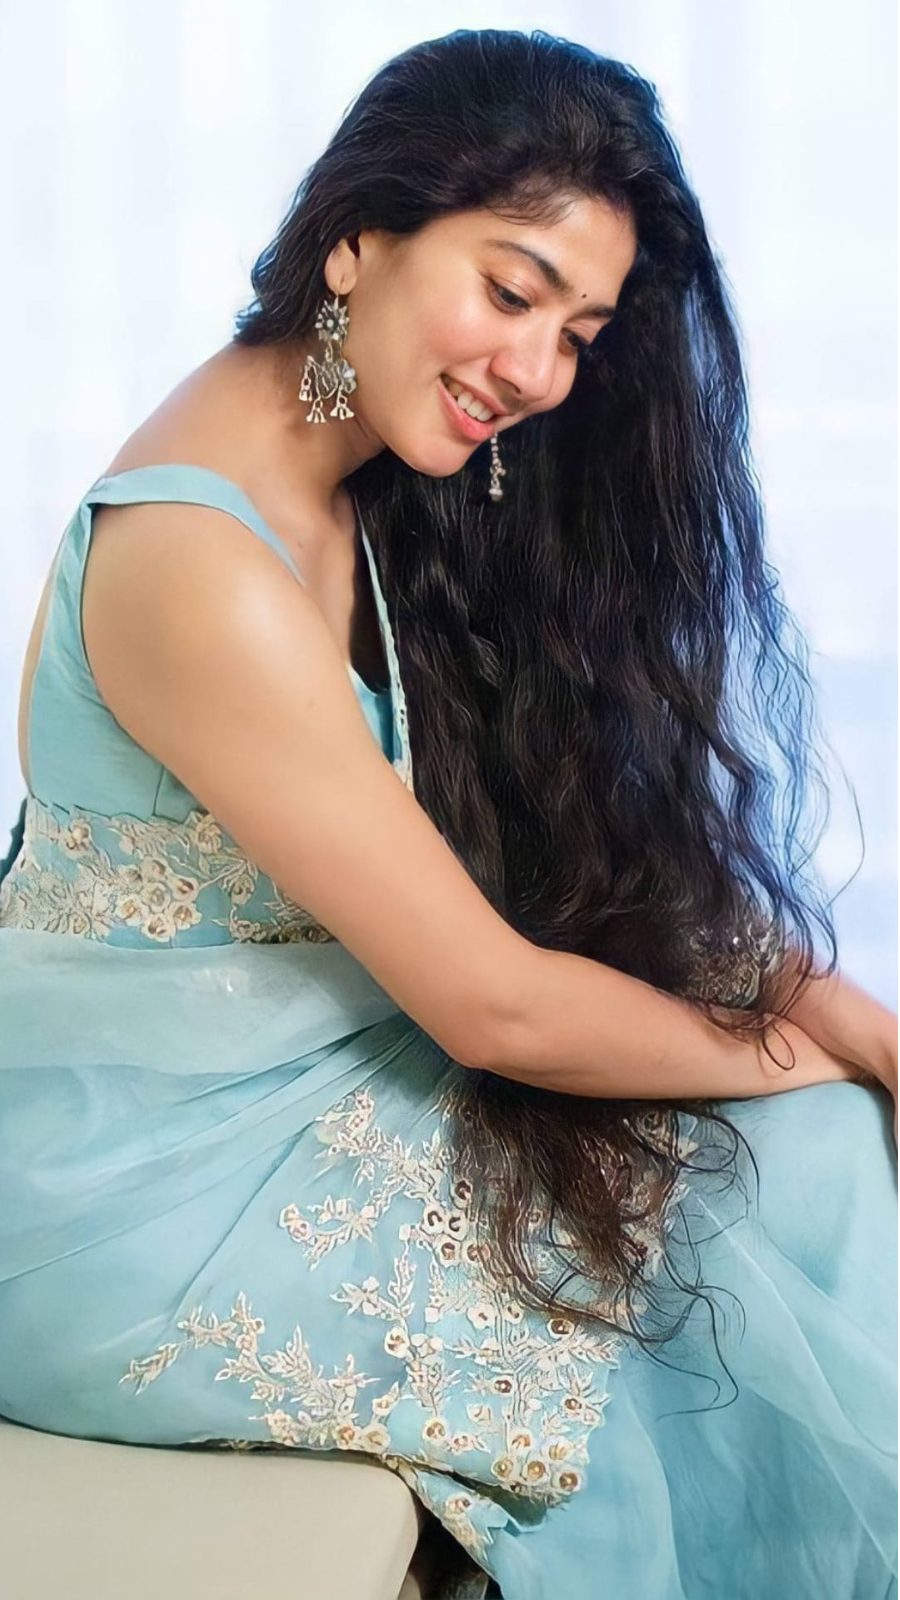 Throwback Tuesday: Times when Sai Pallavi dressed in blue! | Times of India